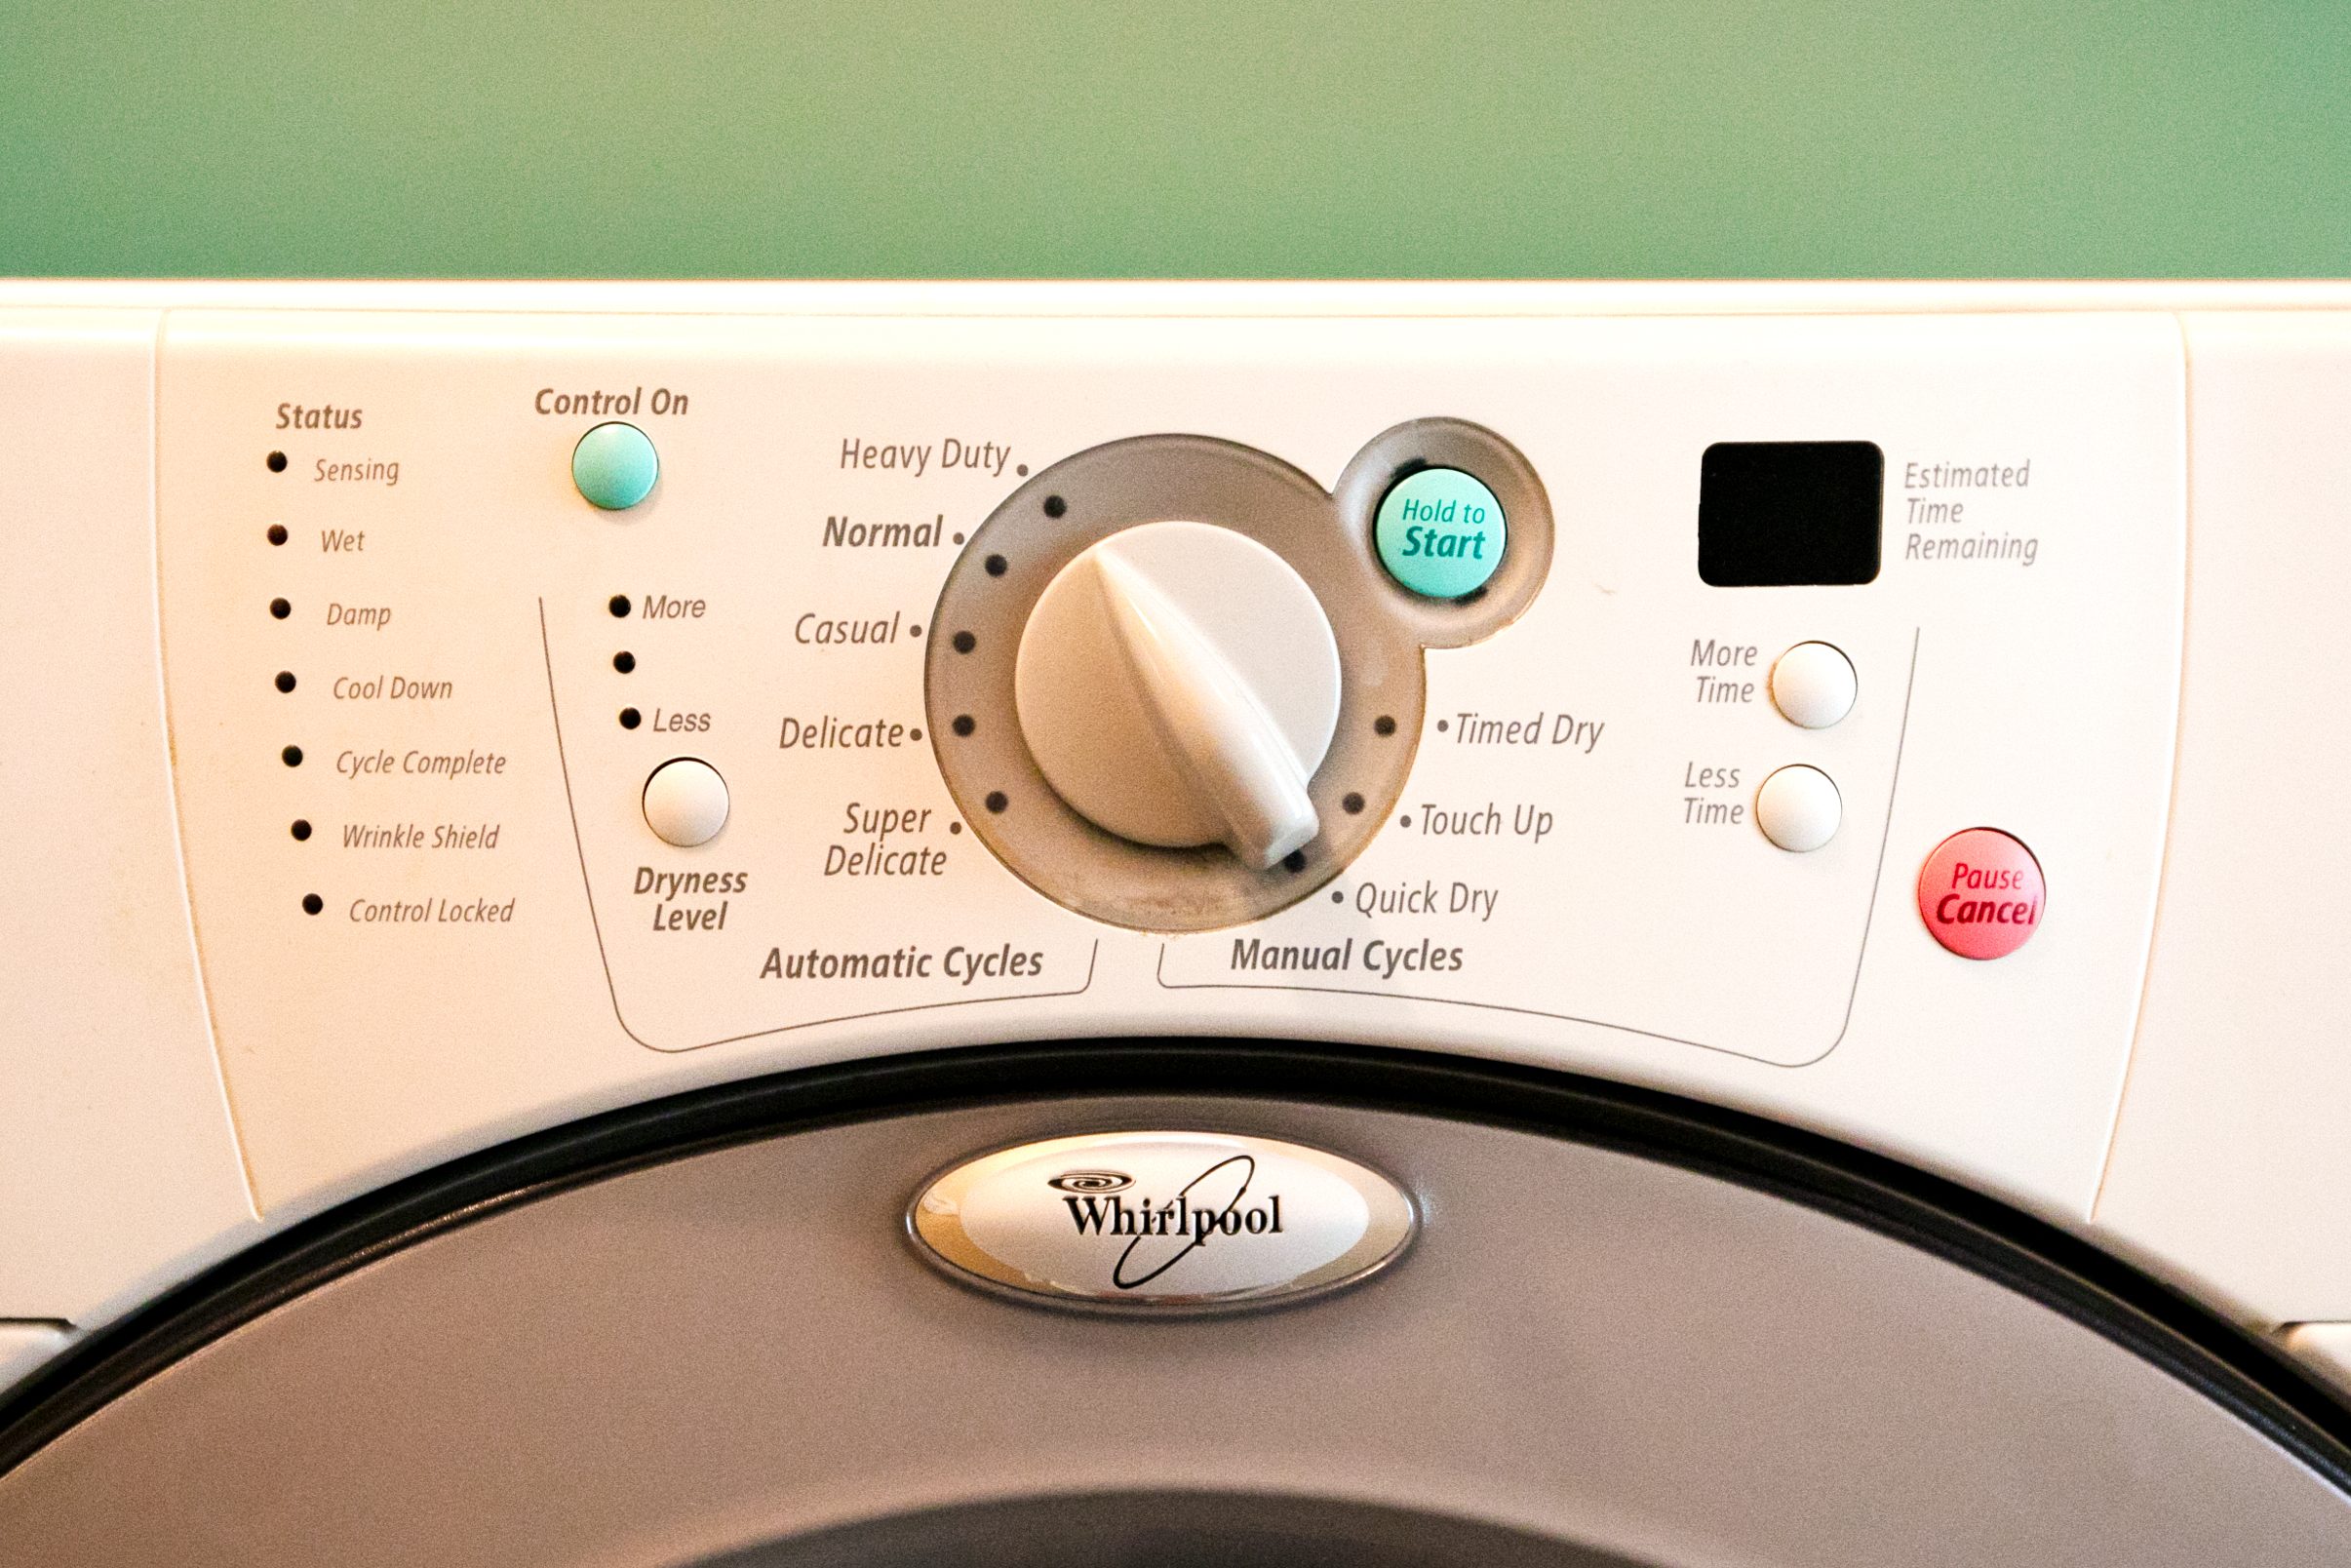 Tumble dryer tips: can you tumble dry jeans?